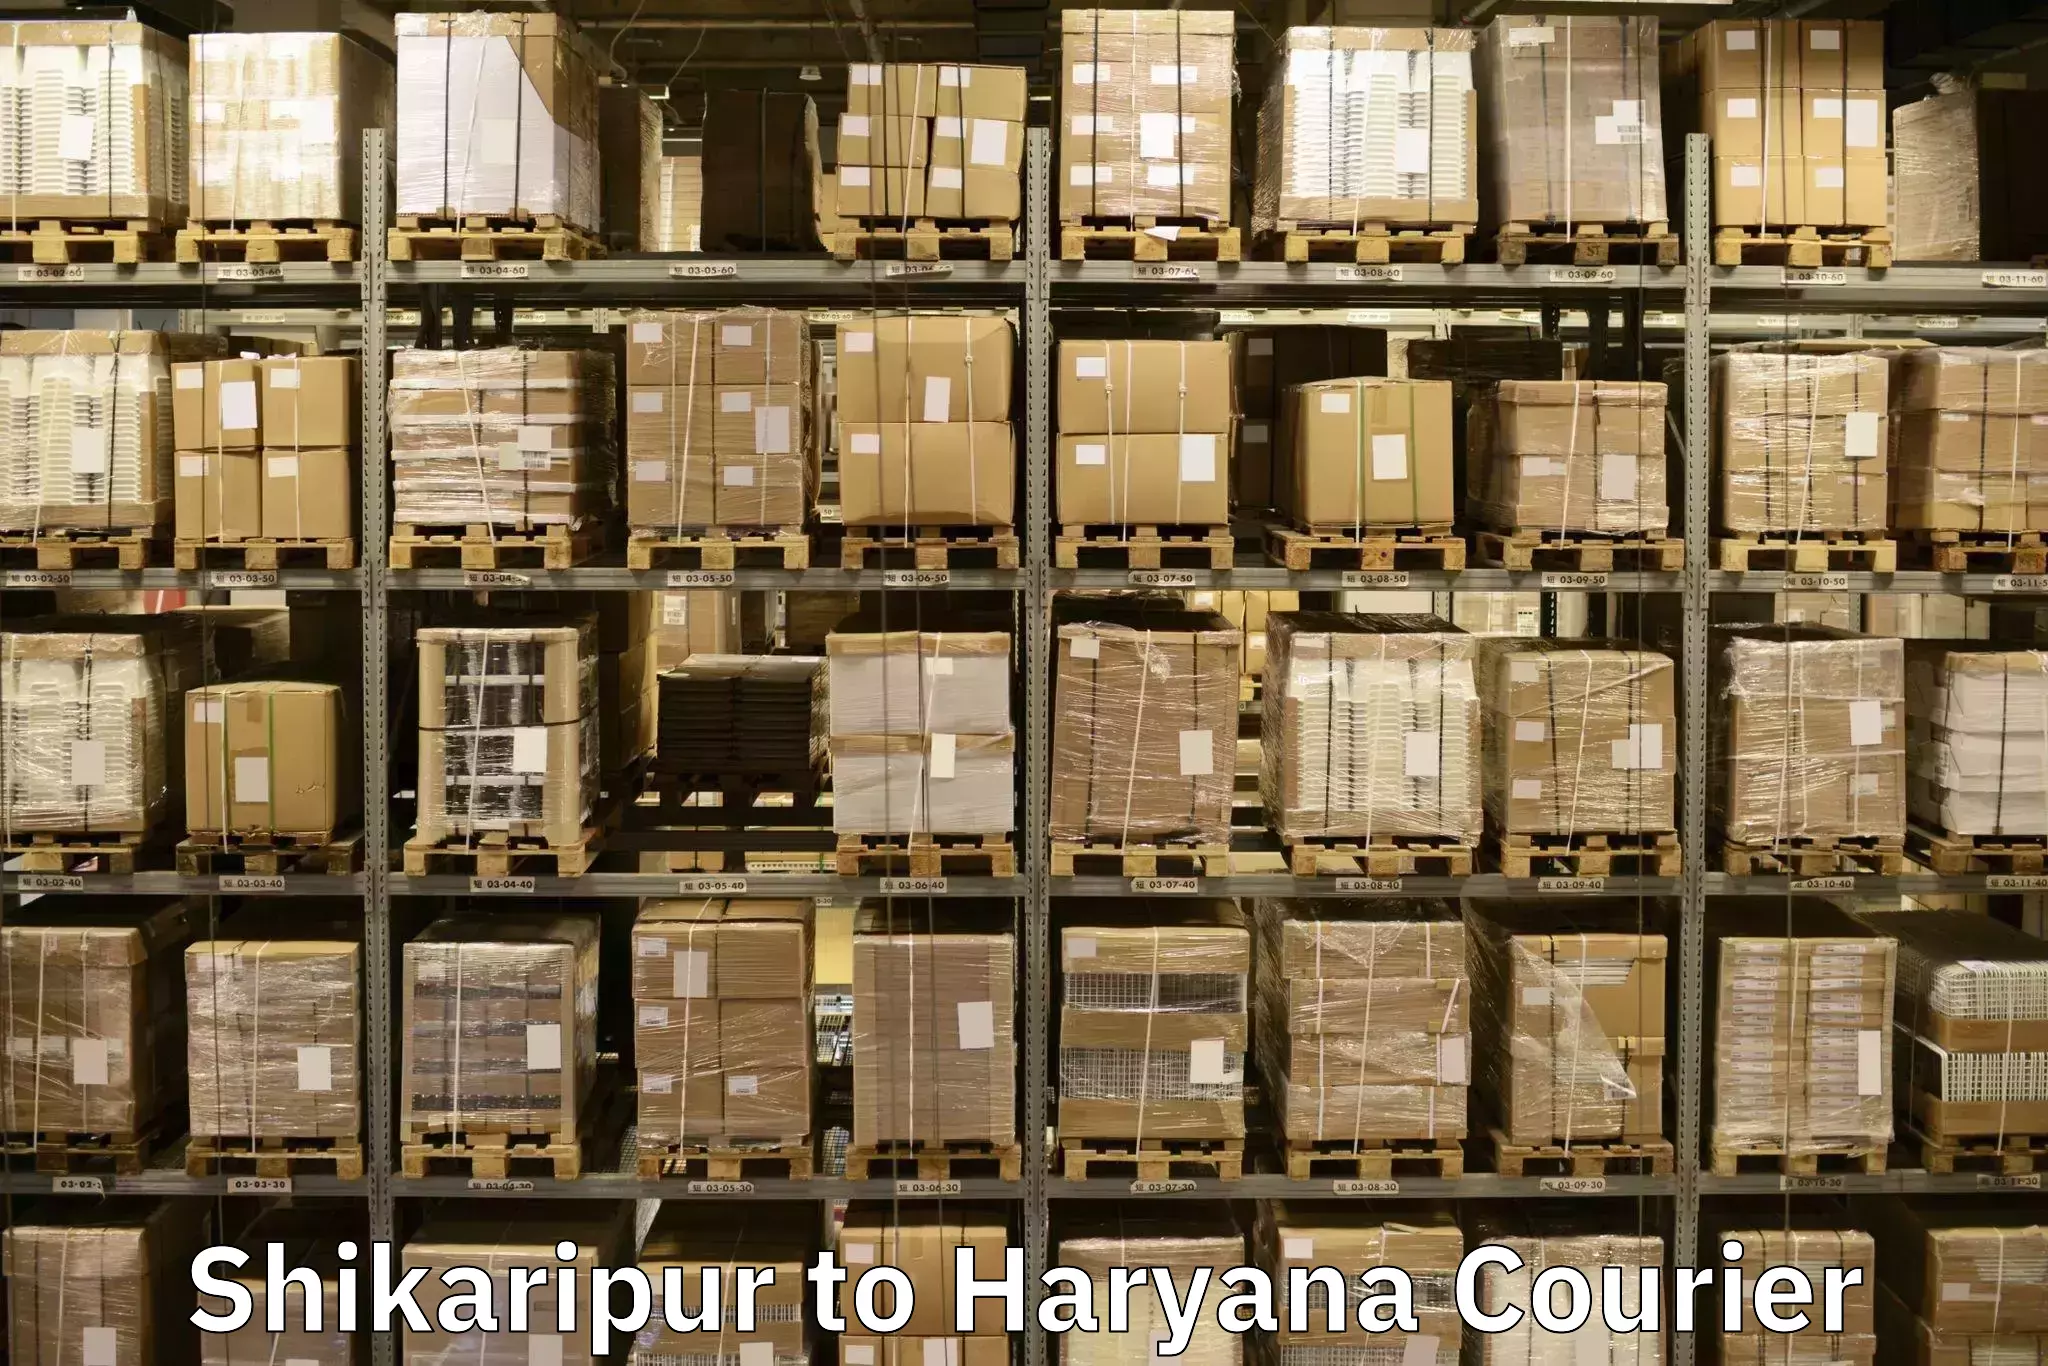 Quality relocation services Shikaripur to Gurugram